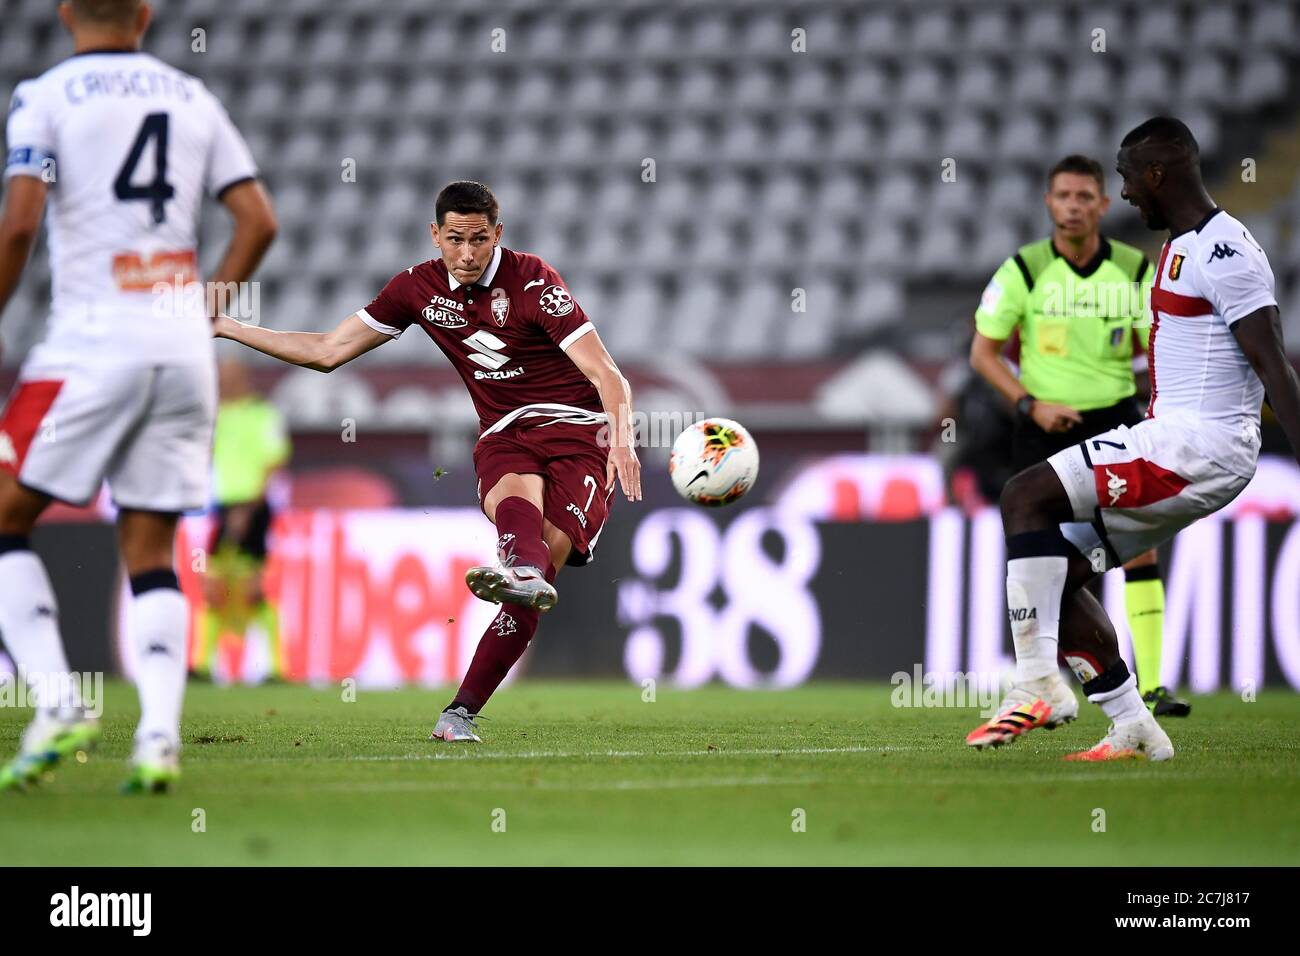 Turin, Italy - 16 July, 2020: Sasa Lukic of Torino FC scores a goal during the Serie A football match between Torino FC and Genoa CFC. Torino FC won 3-0 over Genoa CFC. Credit: Nicolò Campo/Alamy Live News Stock Photo